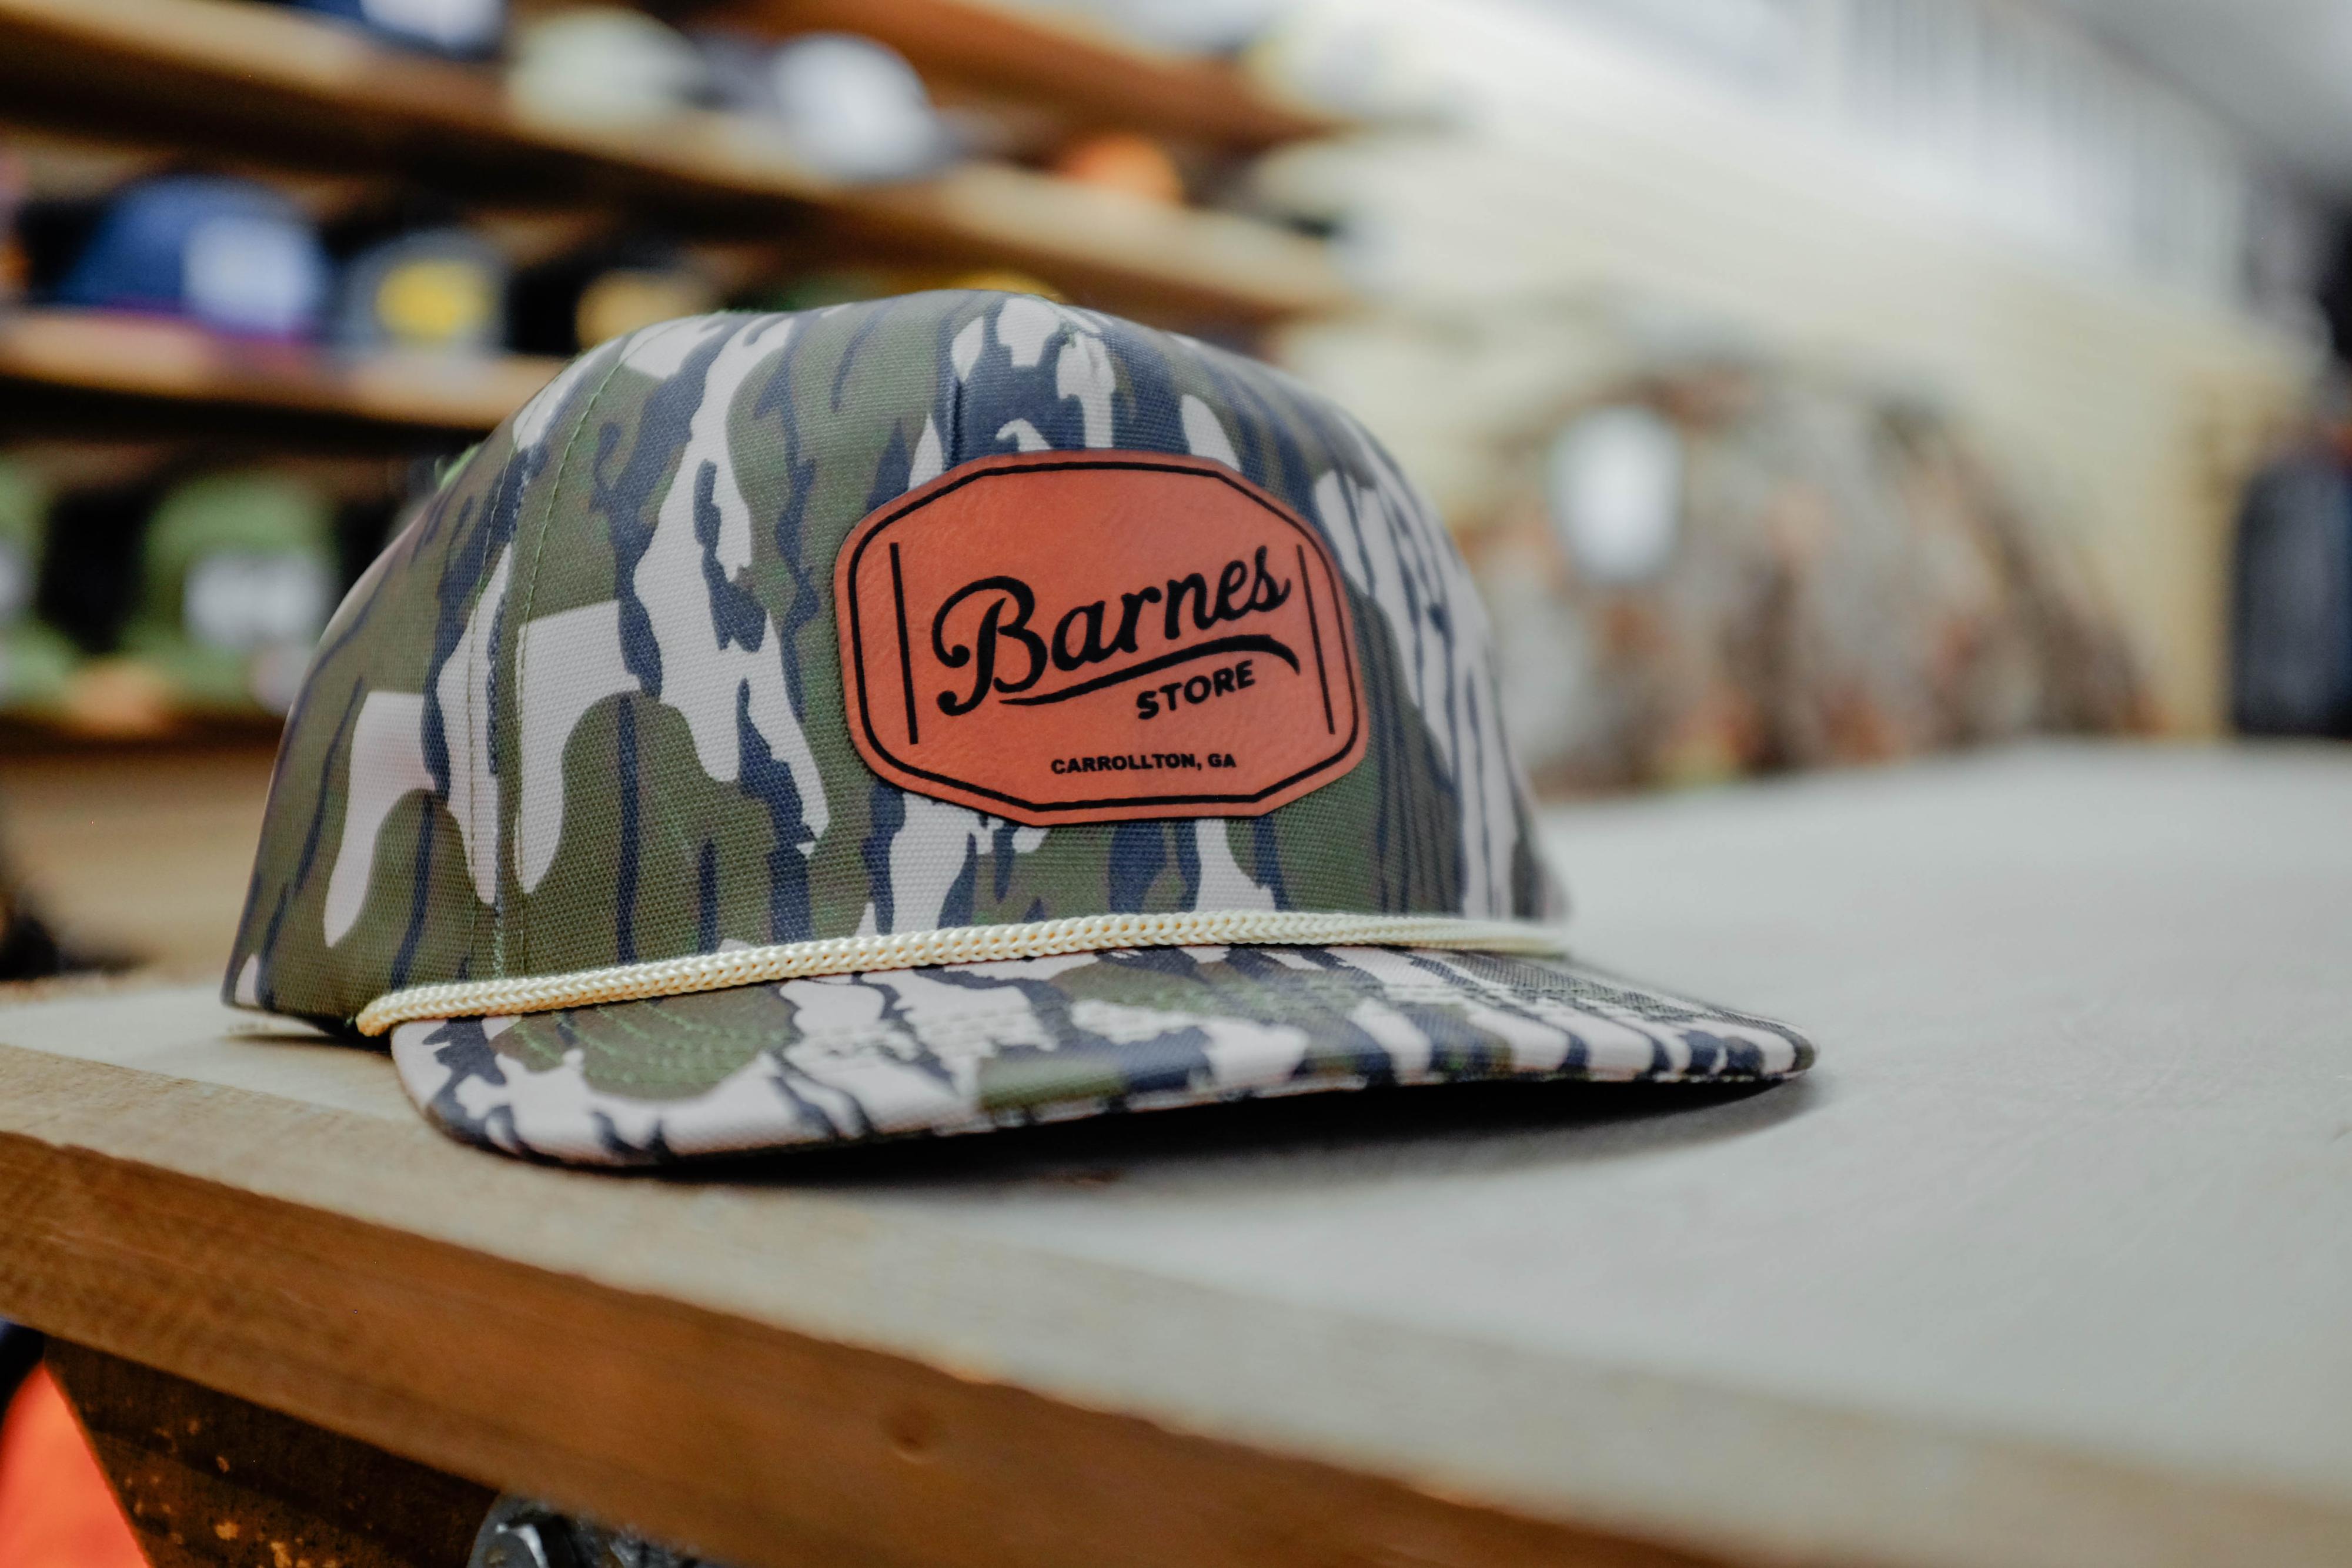  Barnes Store Rope Patch